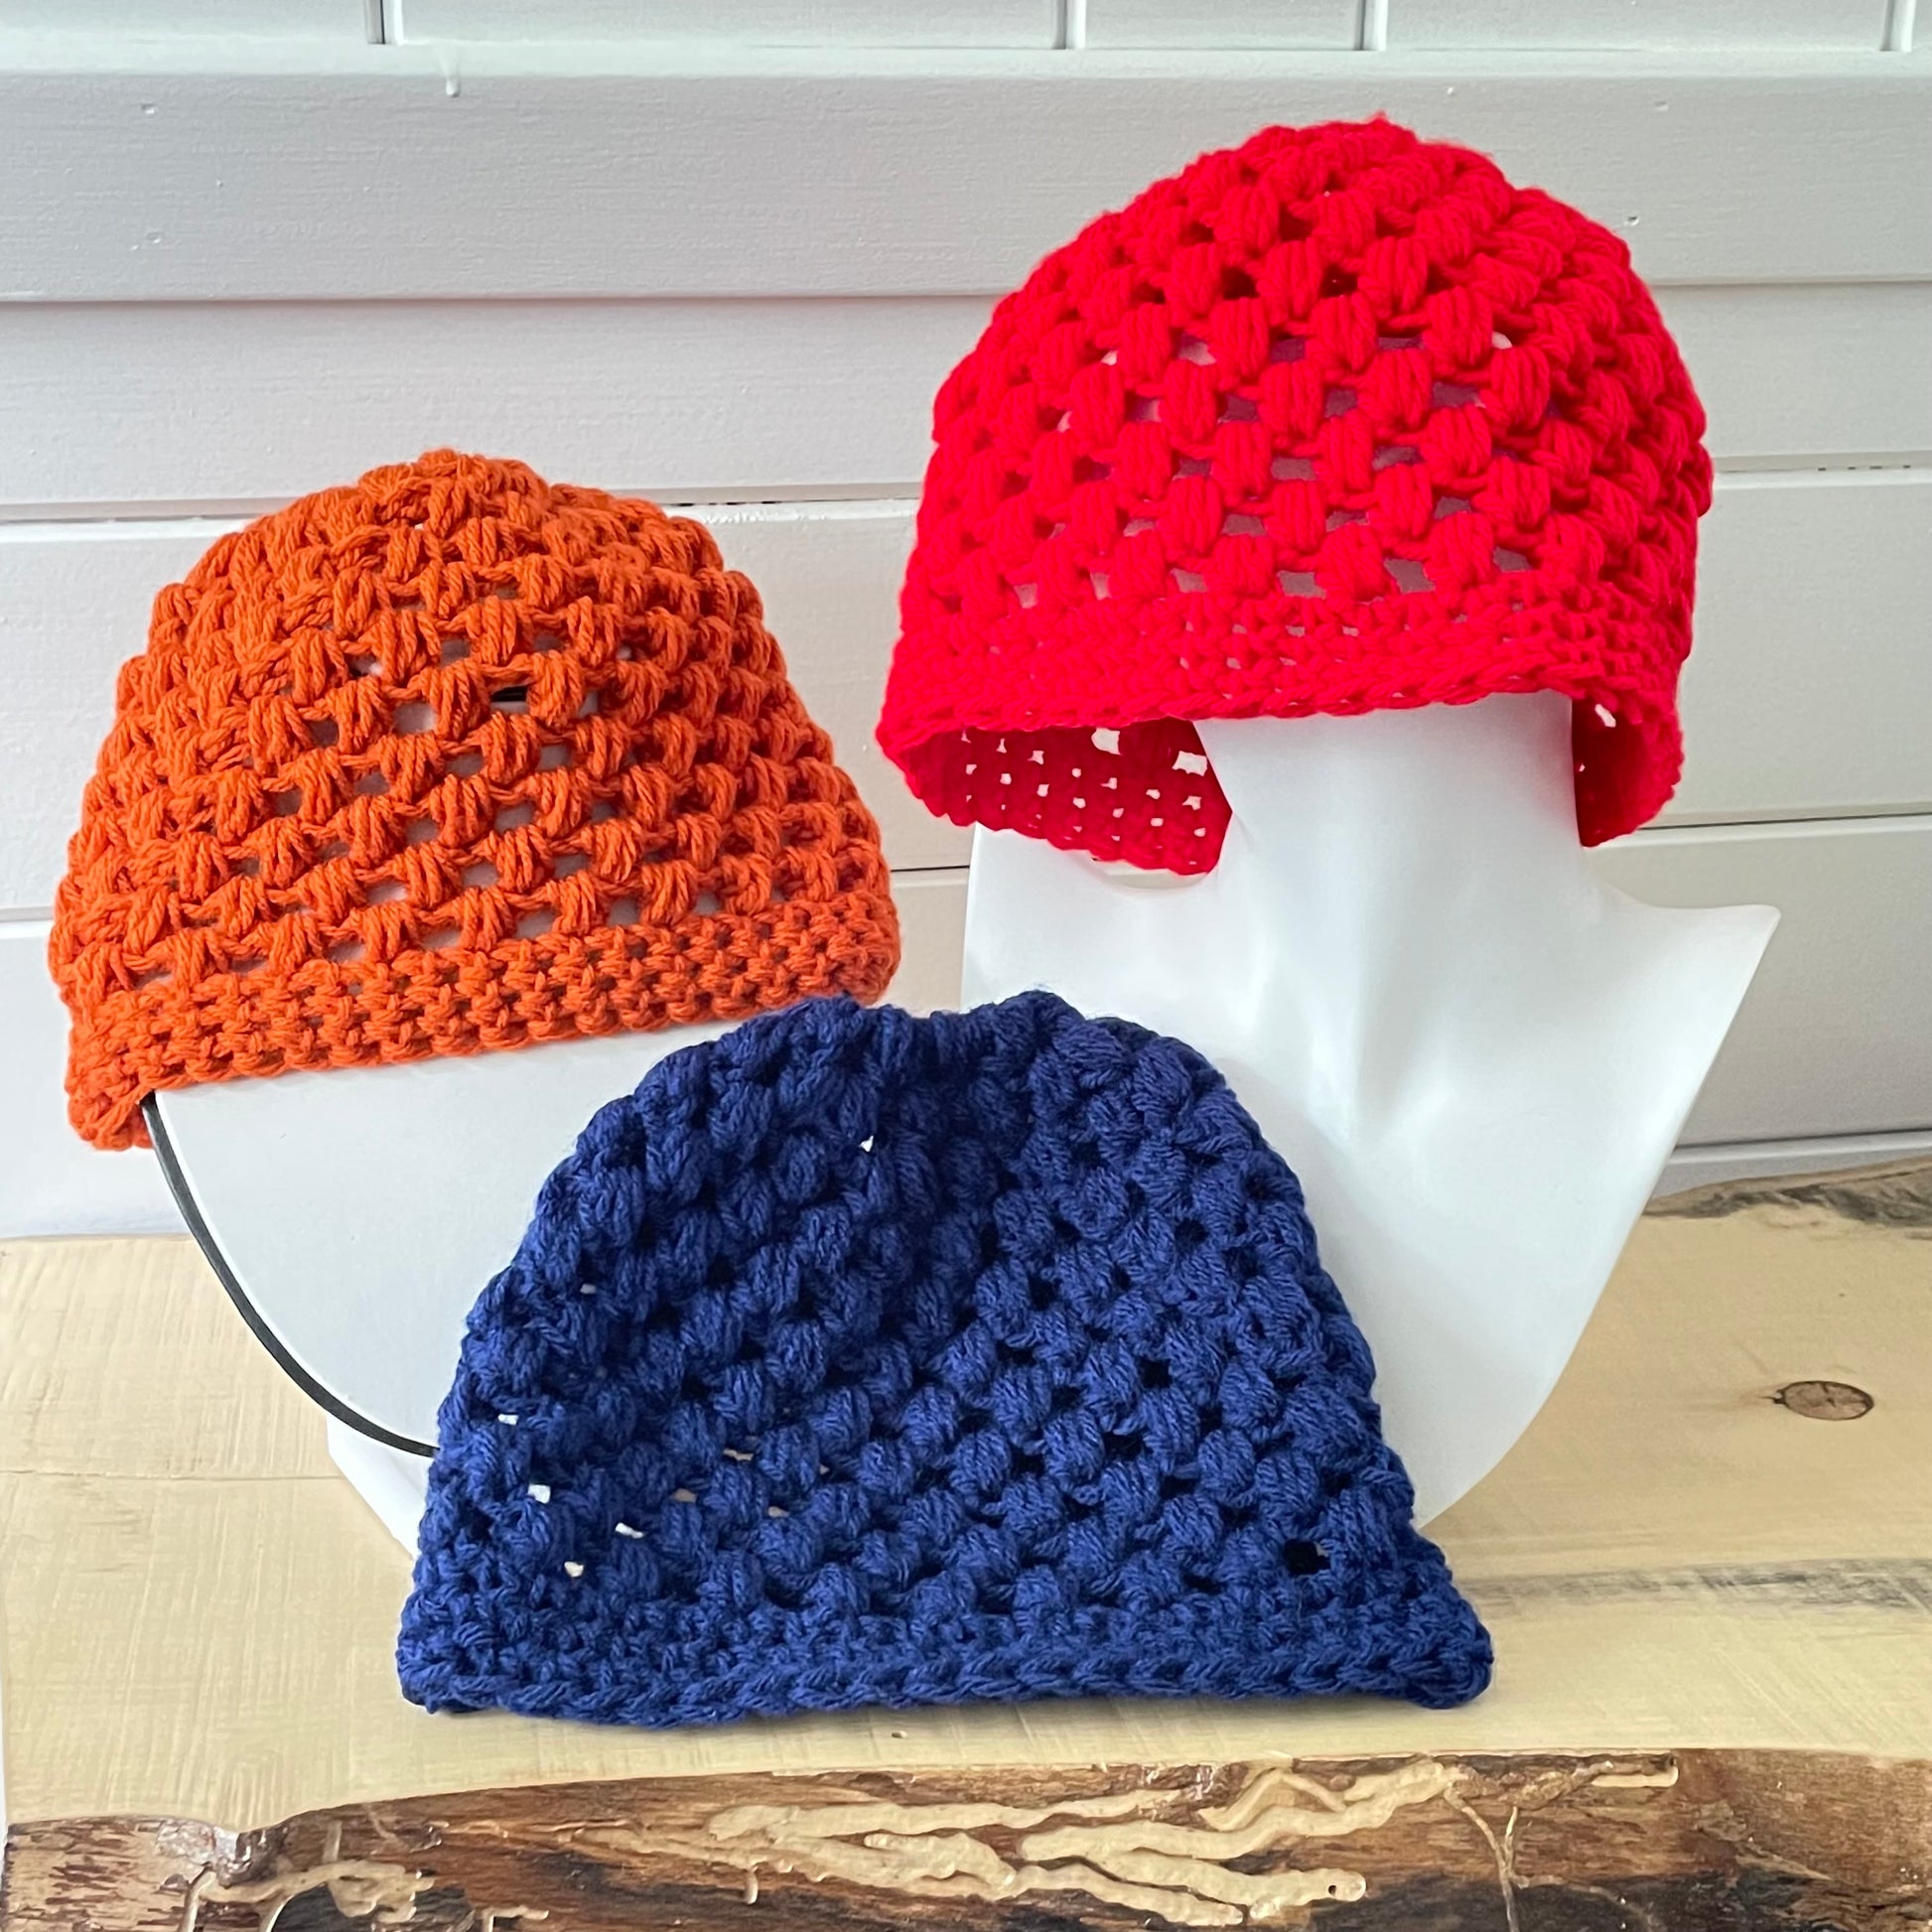 Bright Red Messy Bun Ponytail Hat Open Puffy Stitch Hand Crochet Knit Outdoor Walking Hiking Active Athletes Winter--3 colors of hats displayed